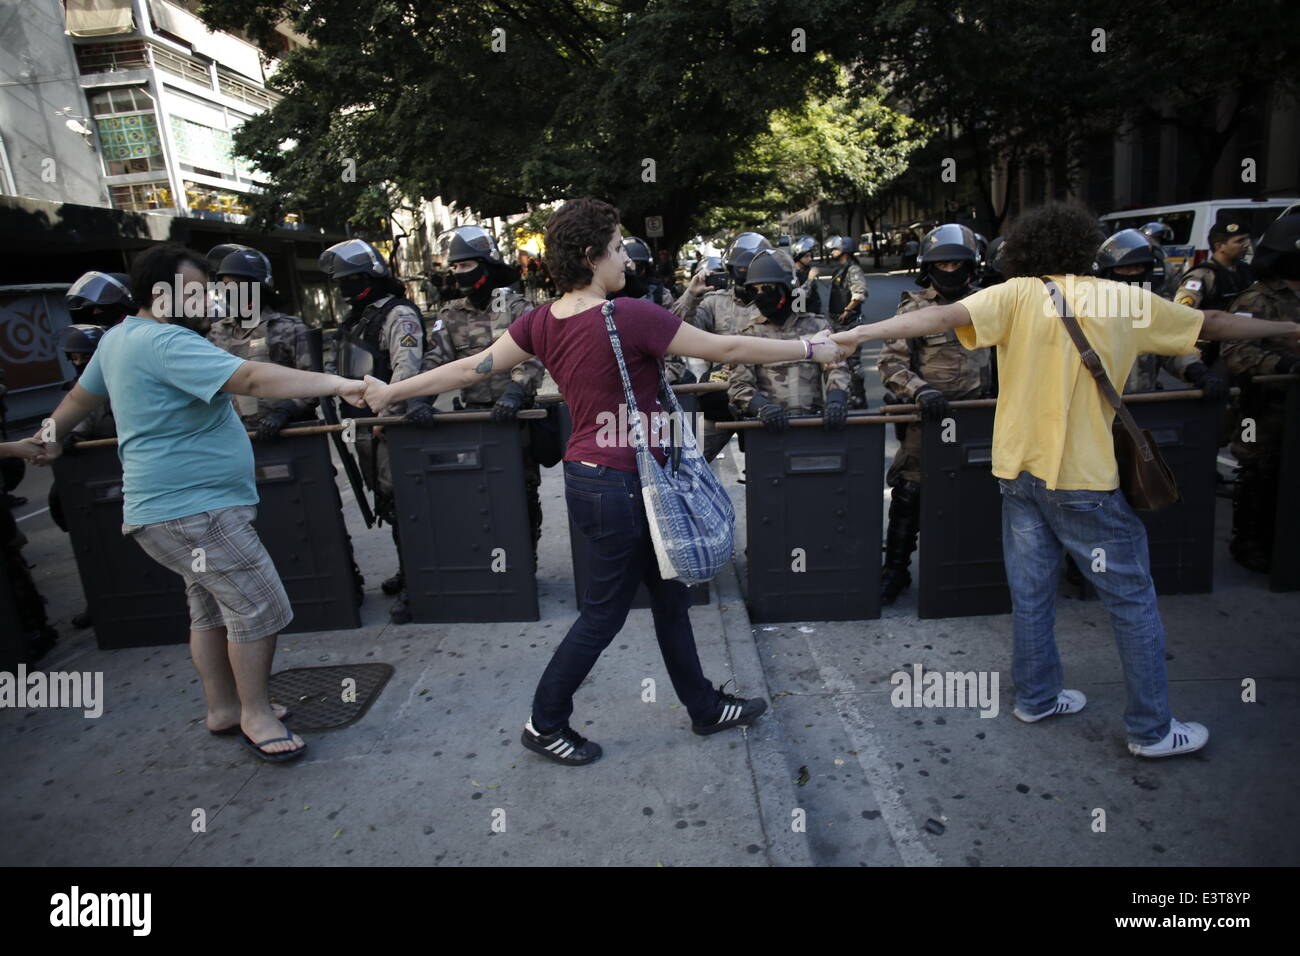 Belo Horizonte, Brazil. 28th June, 2014. Demonstrators walk hand in hand past riot police during a protest against FIFA World Cup in Sao Paulo, Brazil, on June 28, 2014. Credit:  Mauricio Valenzuela/Xinhua/Alamy Live News Stock Photo